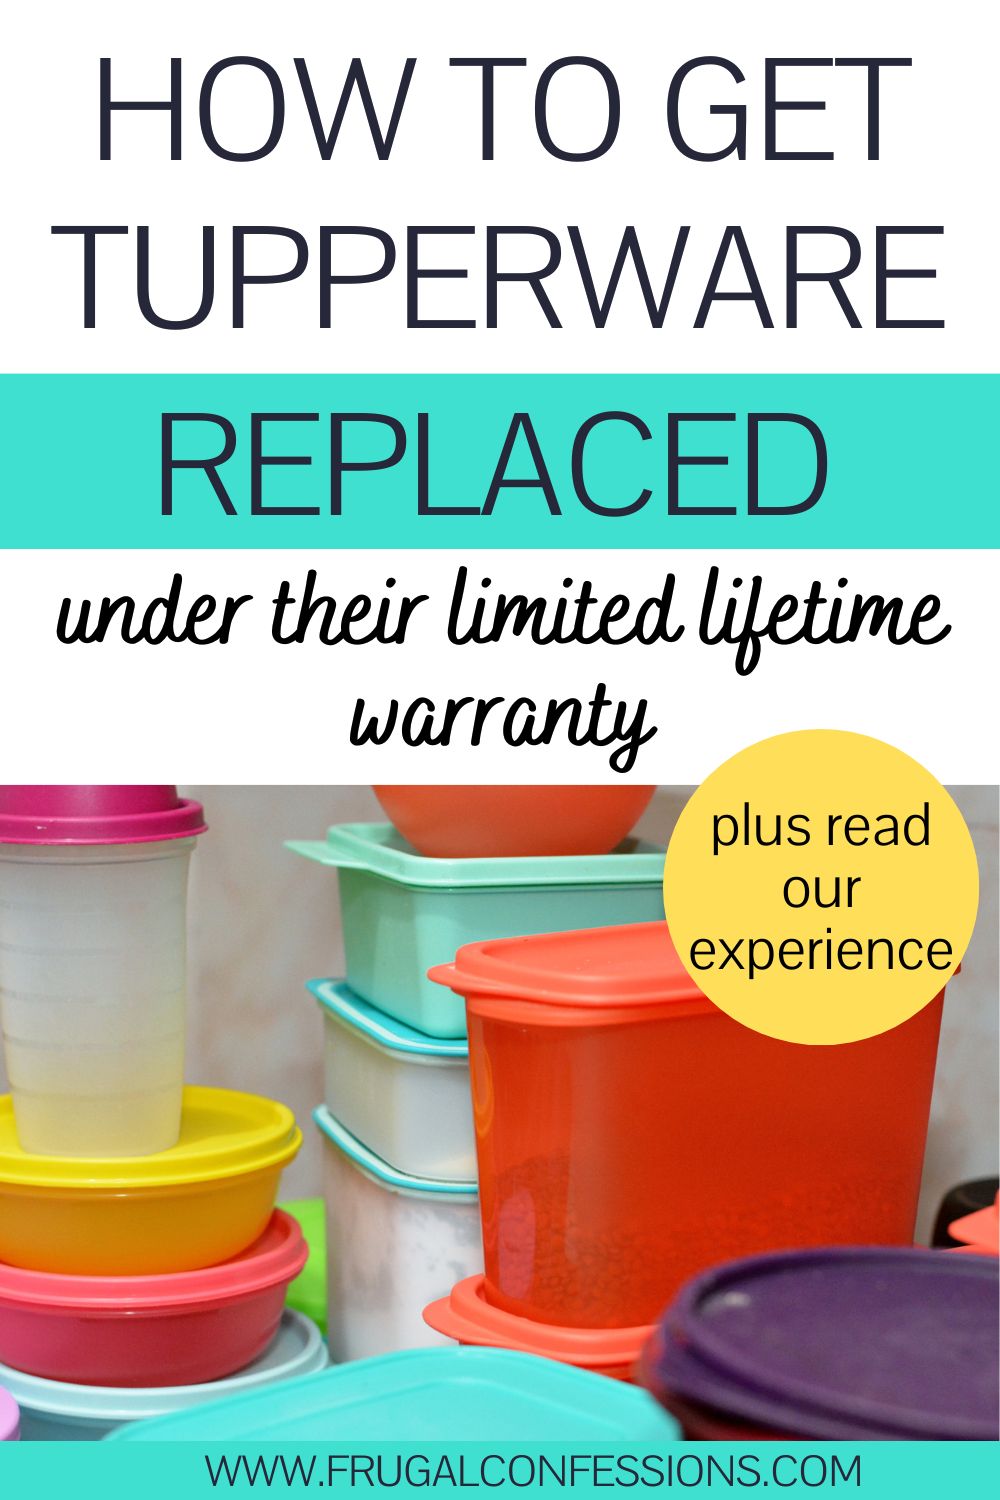 collection of colorful Tupperware containers with lids on counter, text overlay "how to get Tupperware replaced under their limited lifetime warranty"